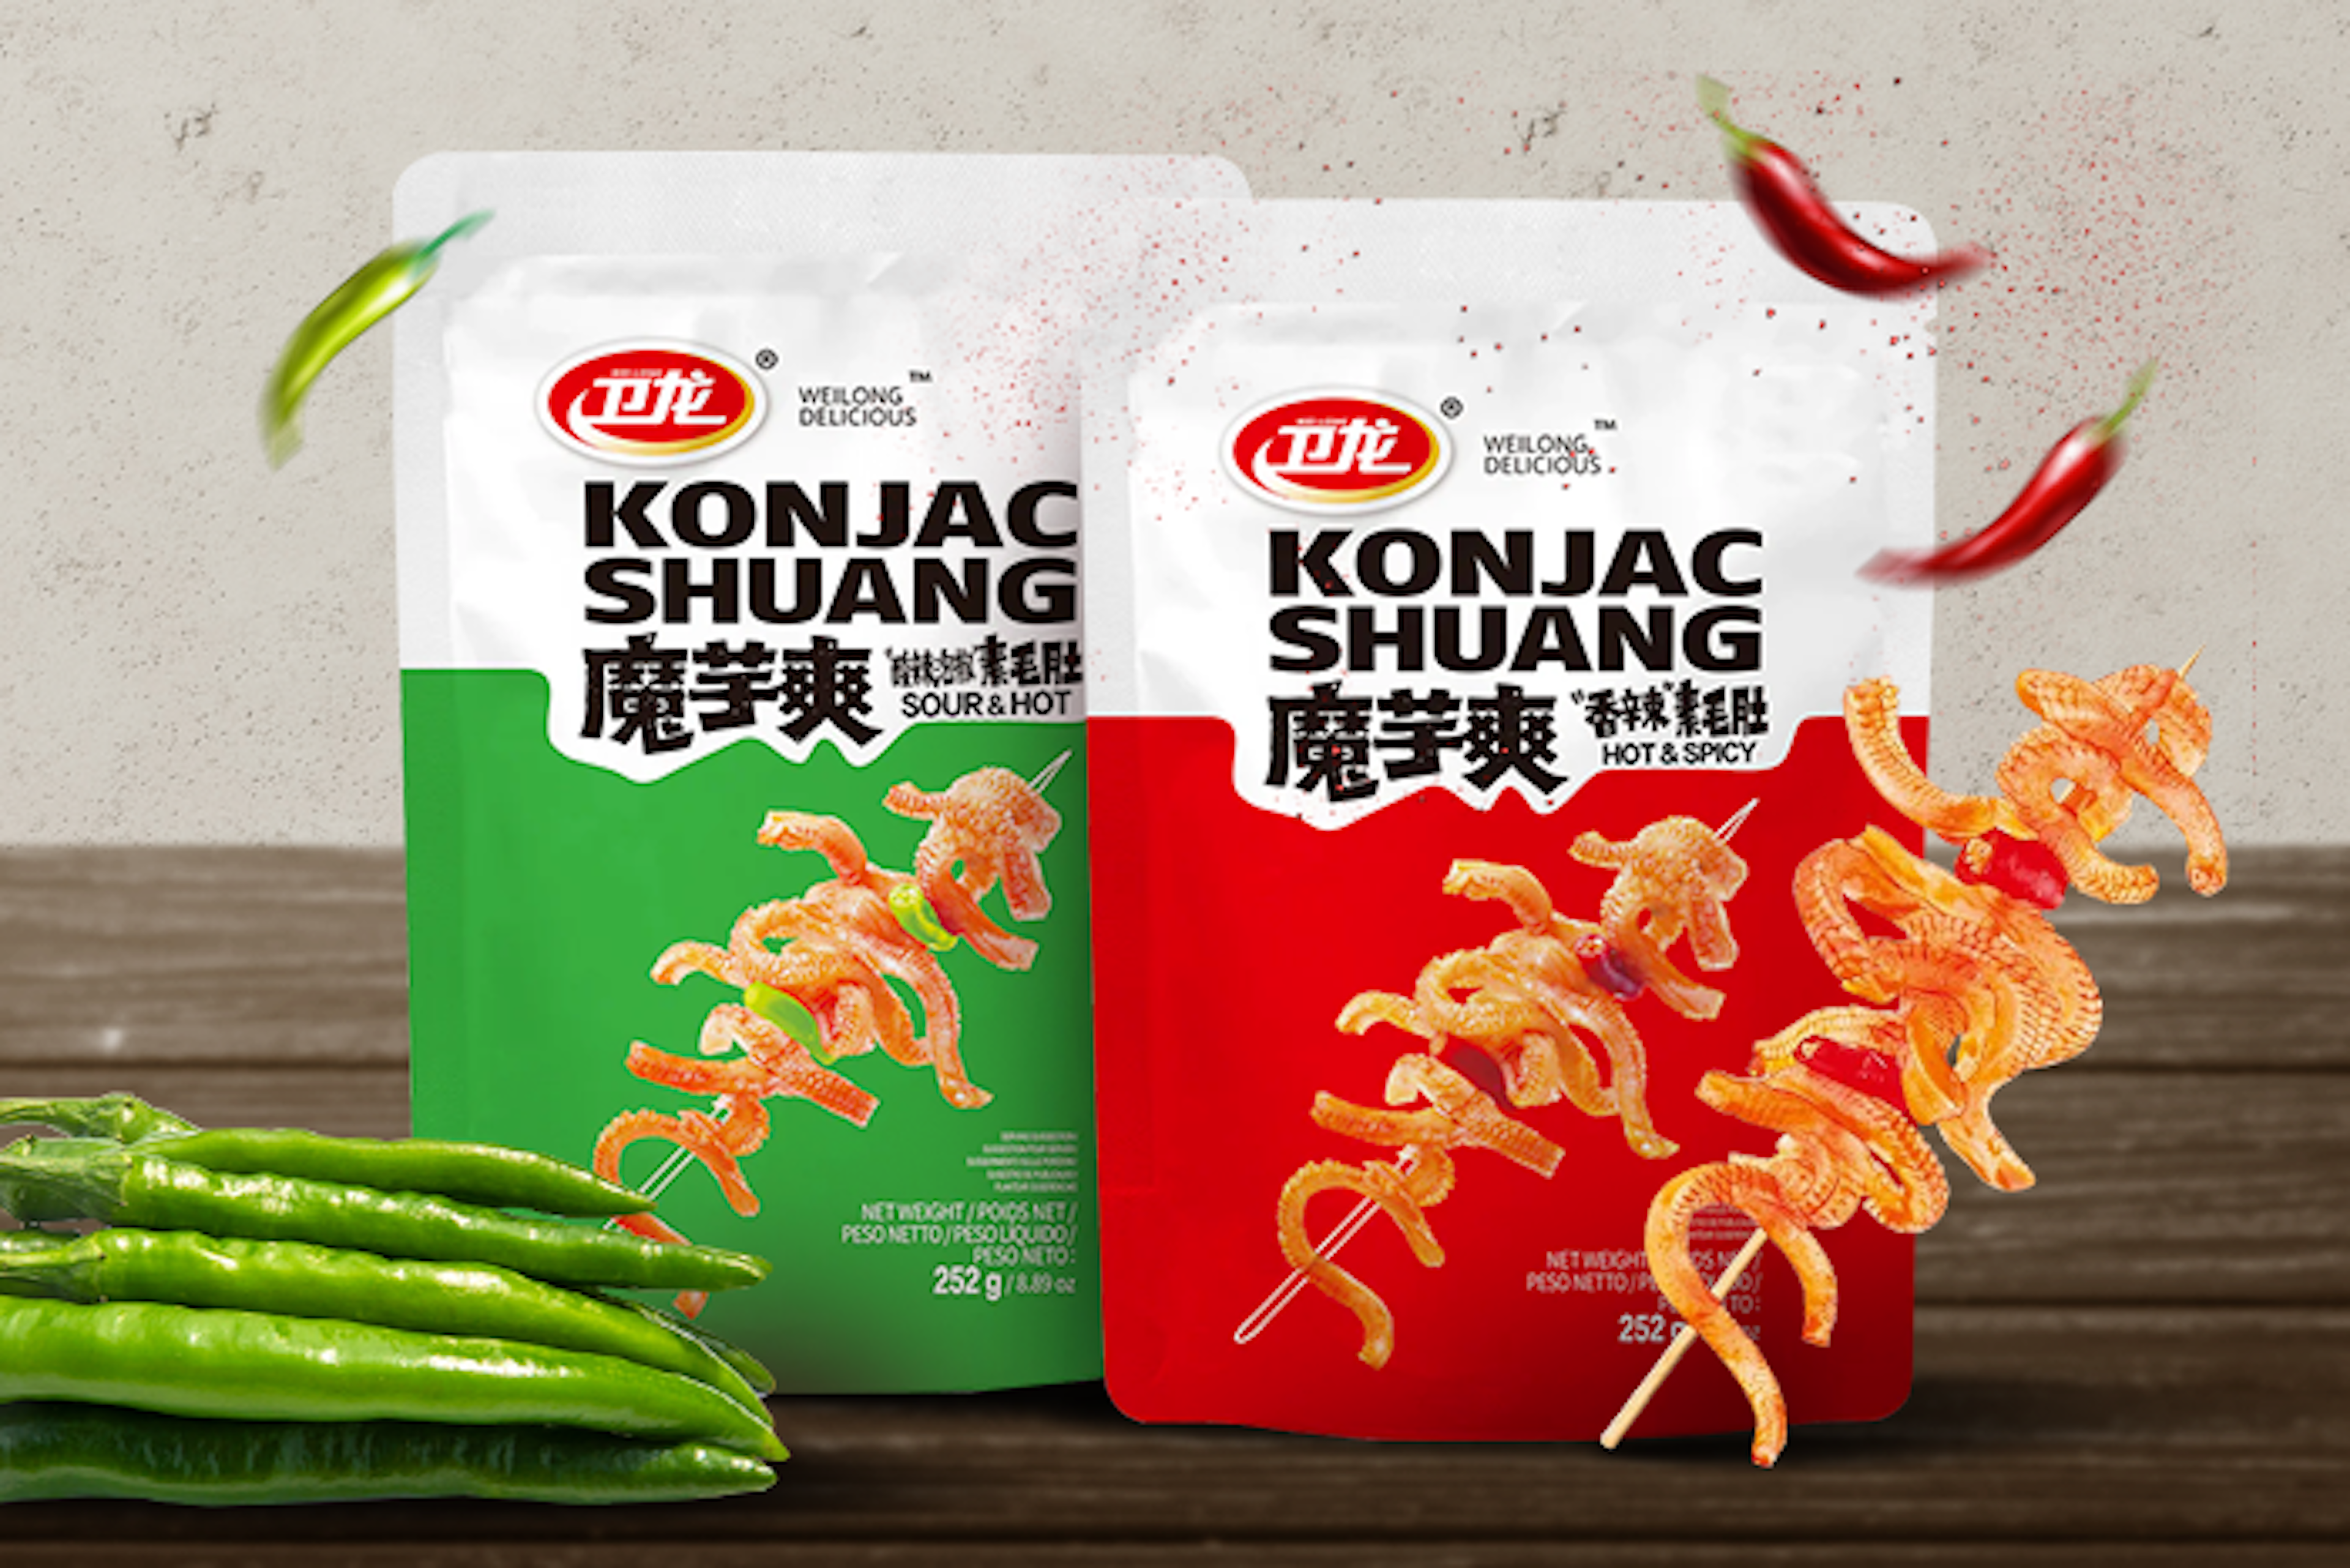 Wei Long Konjac Shuang Hot & Spicy 252g - Spicy and Flavorful Snack